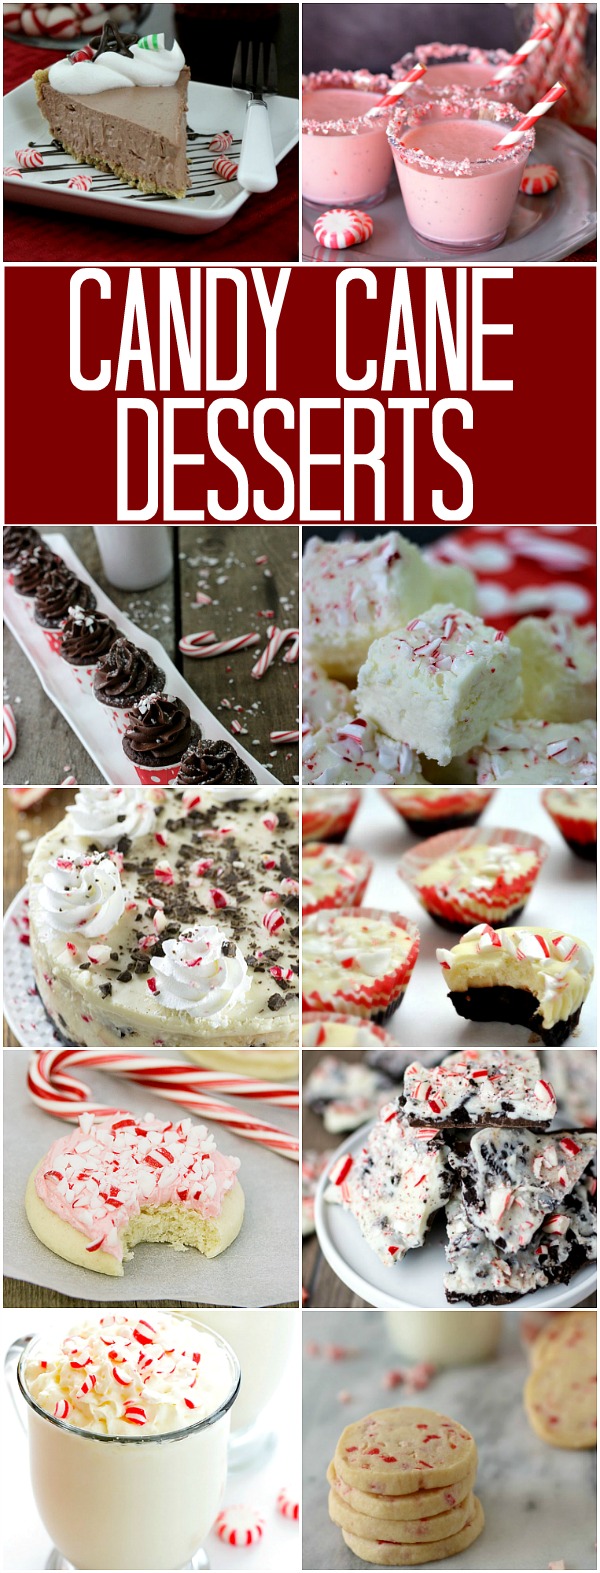 CANDY CANE DESSERTS: 100 DAYS OF HOMEMADE HOLIDAY INSPIRATION